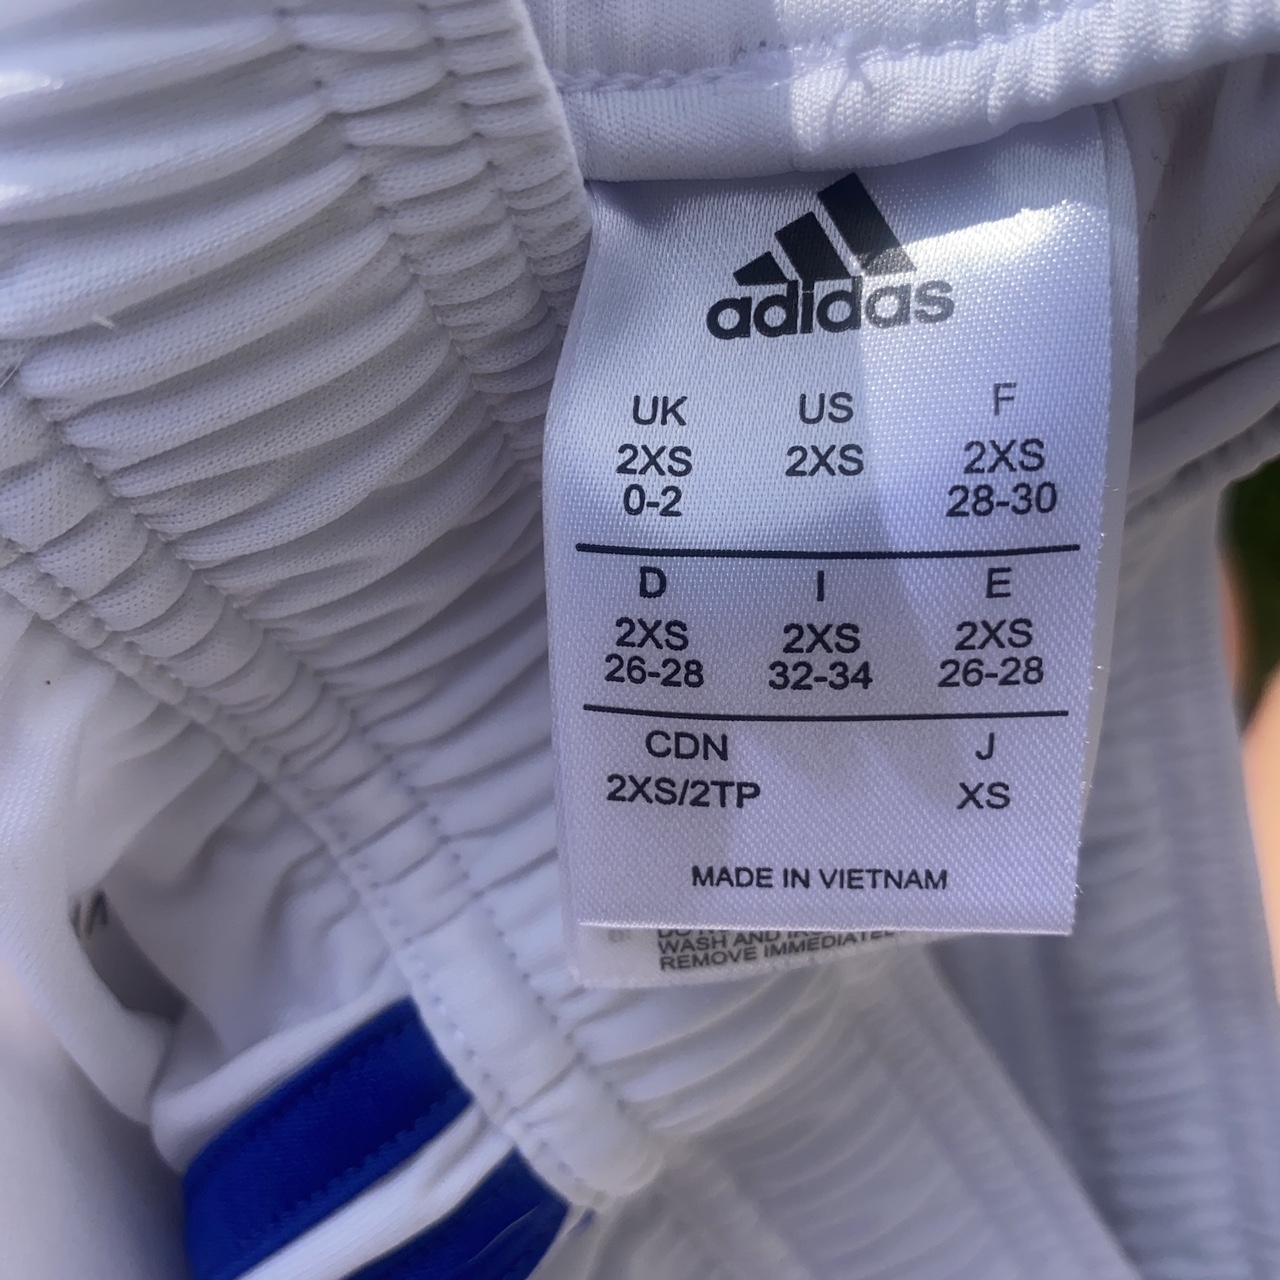 Adidas Women's White and Blue Shorts (4)